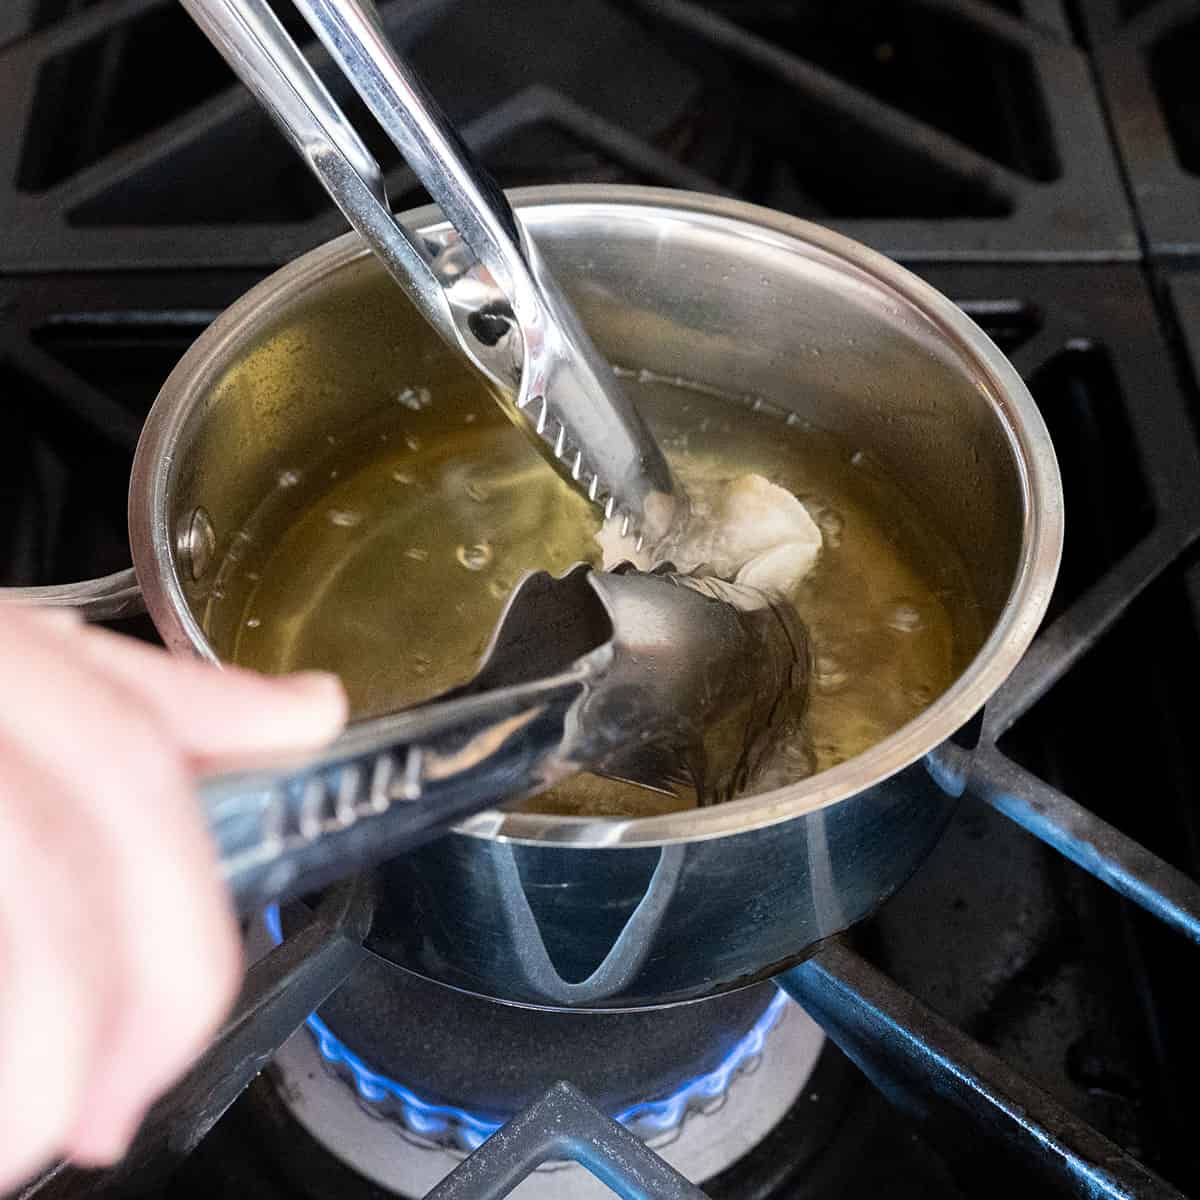 Two pairs of tongs holding lumpia taco shell in oil.